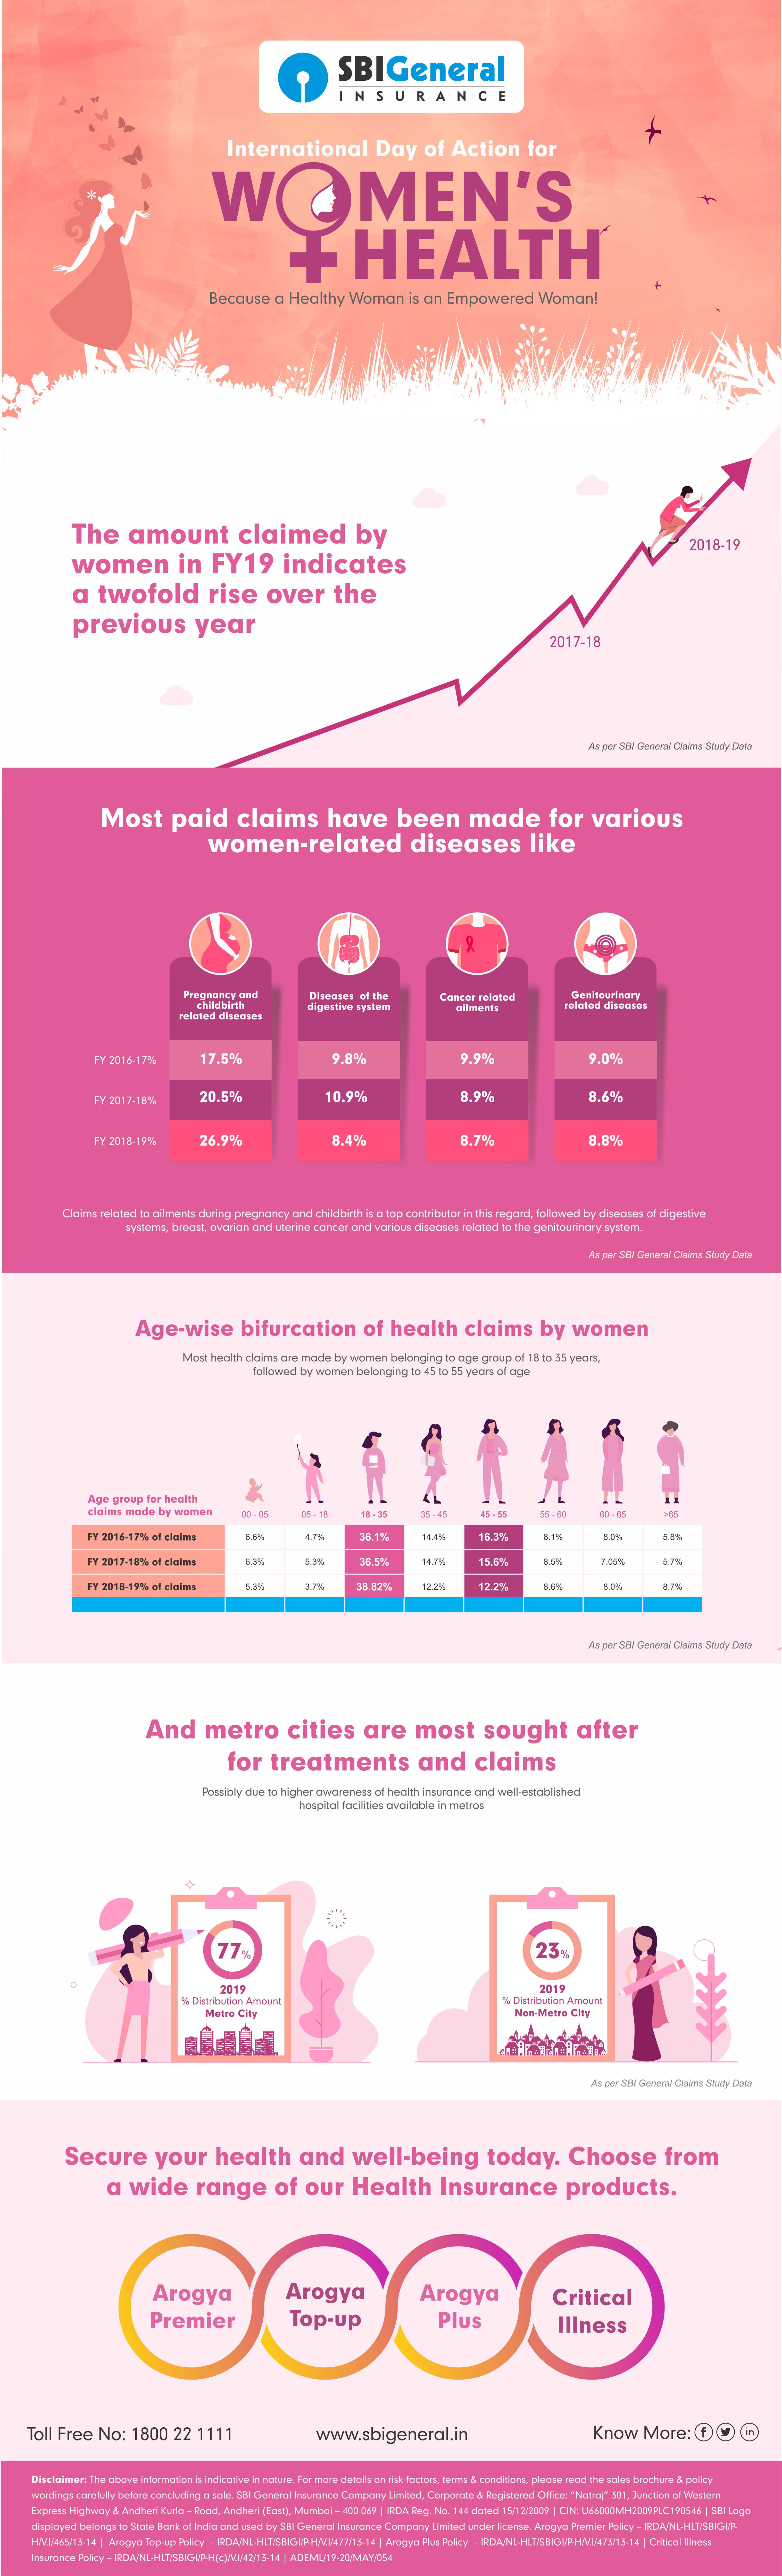 International Day of Action for Women's Health.